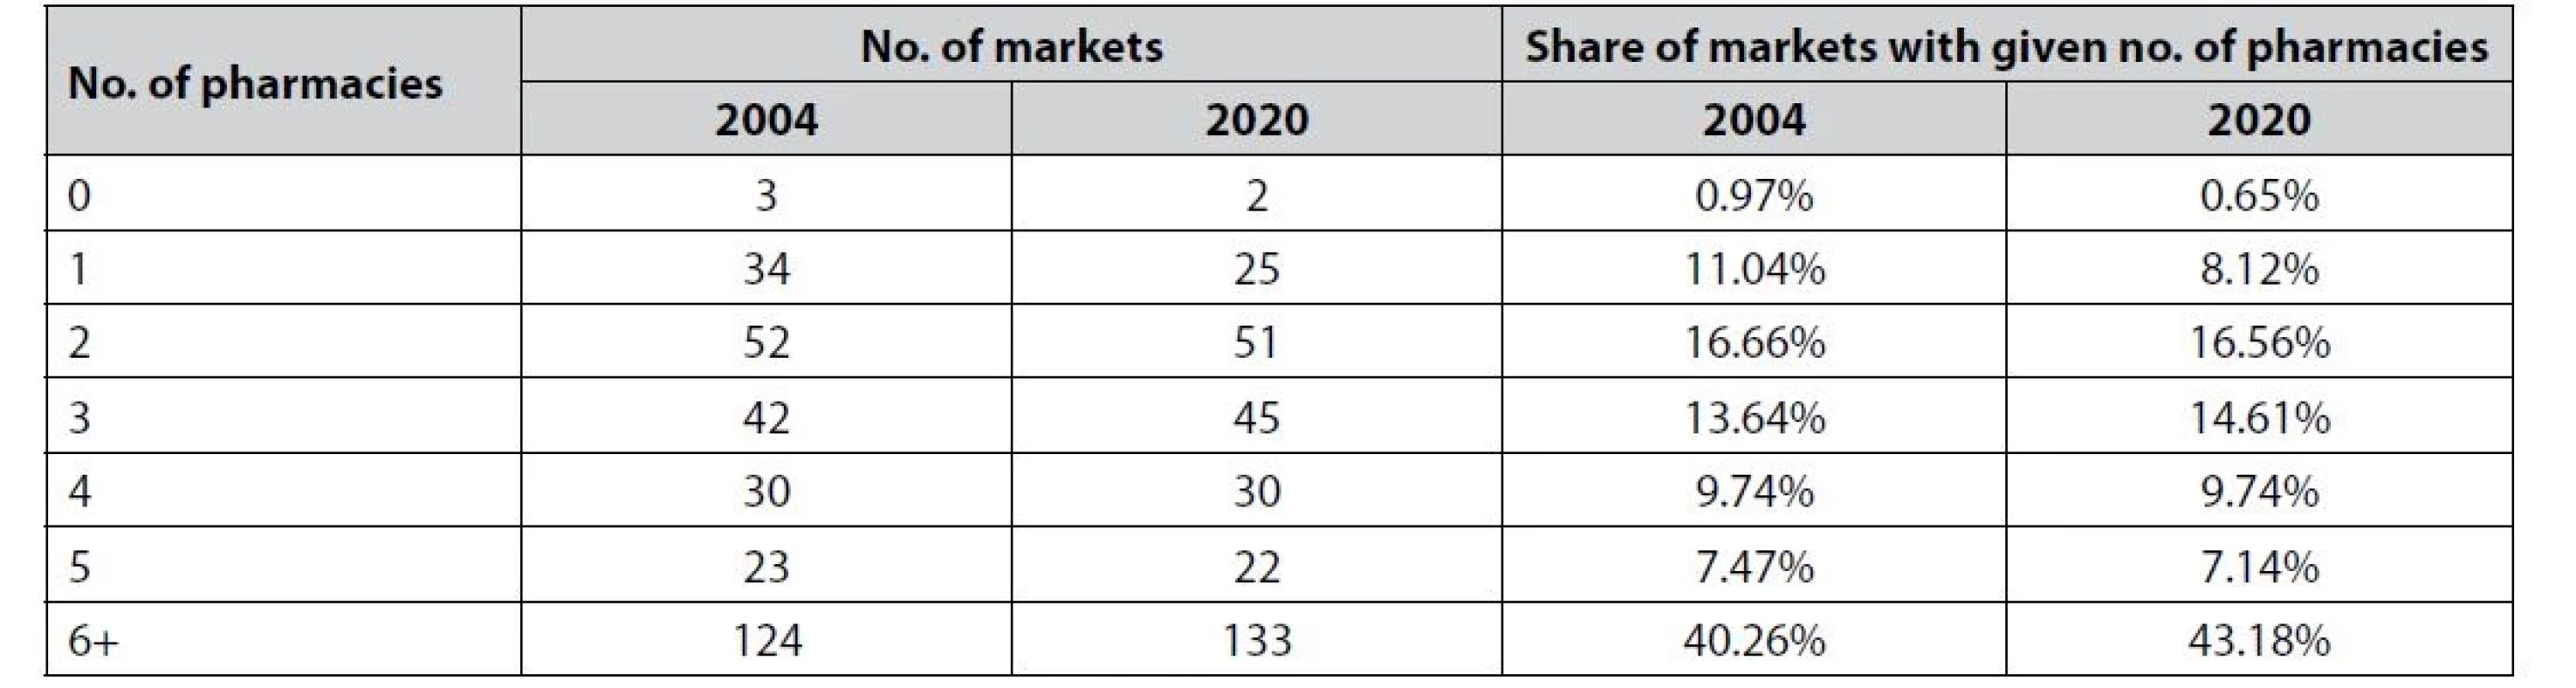 The amount and share of the markets with given No. of pharmacies in 2004 and 2020